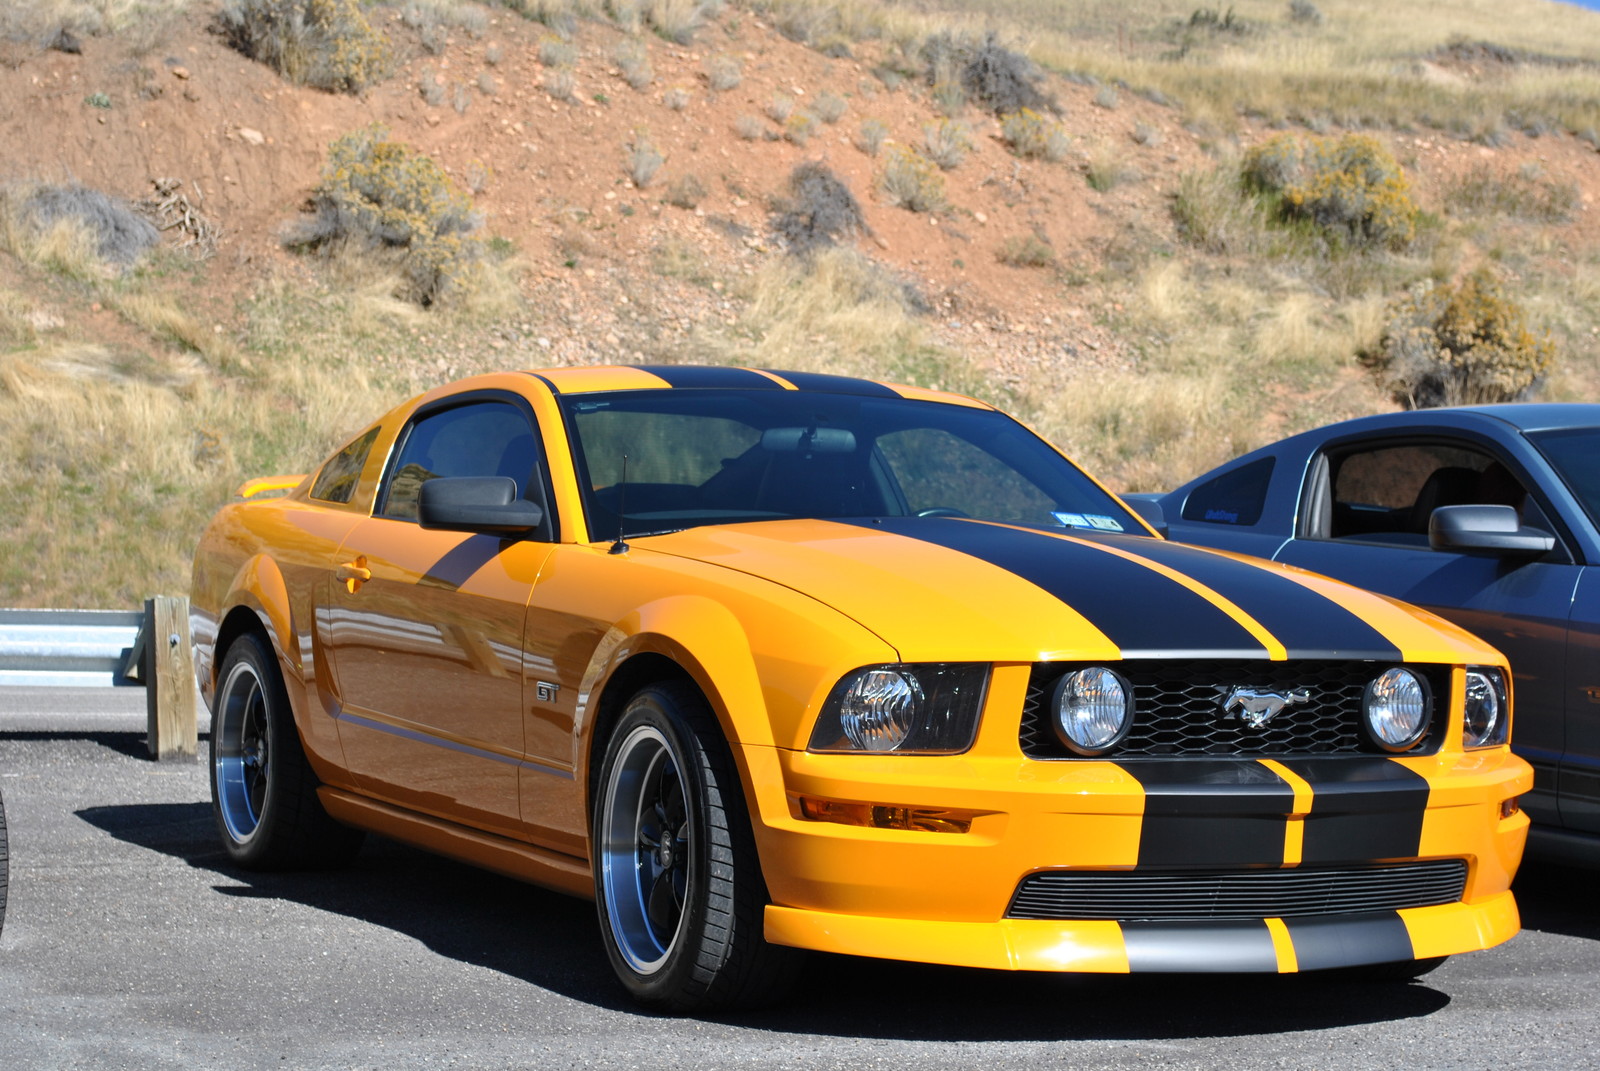 2007 Ford mustang gt quarter mile #1